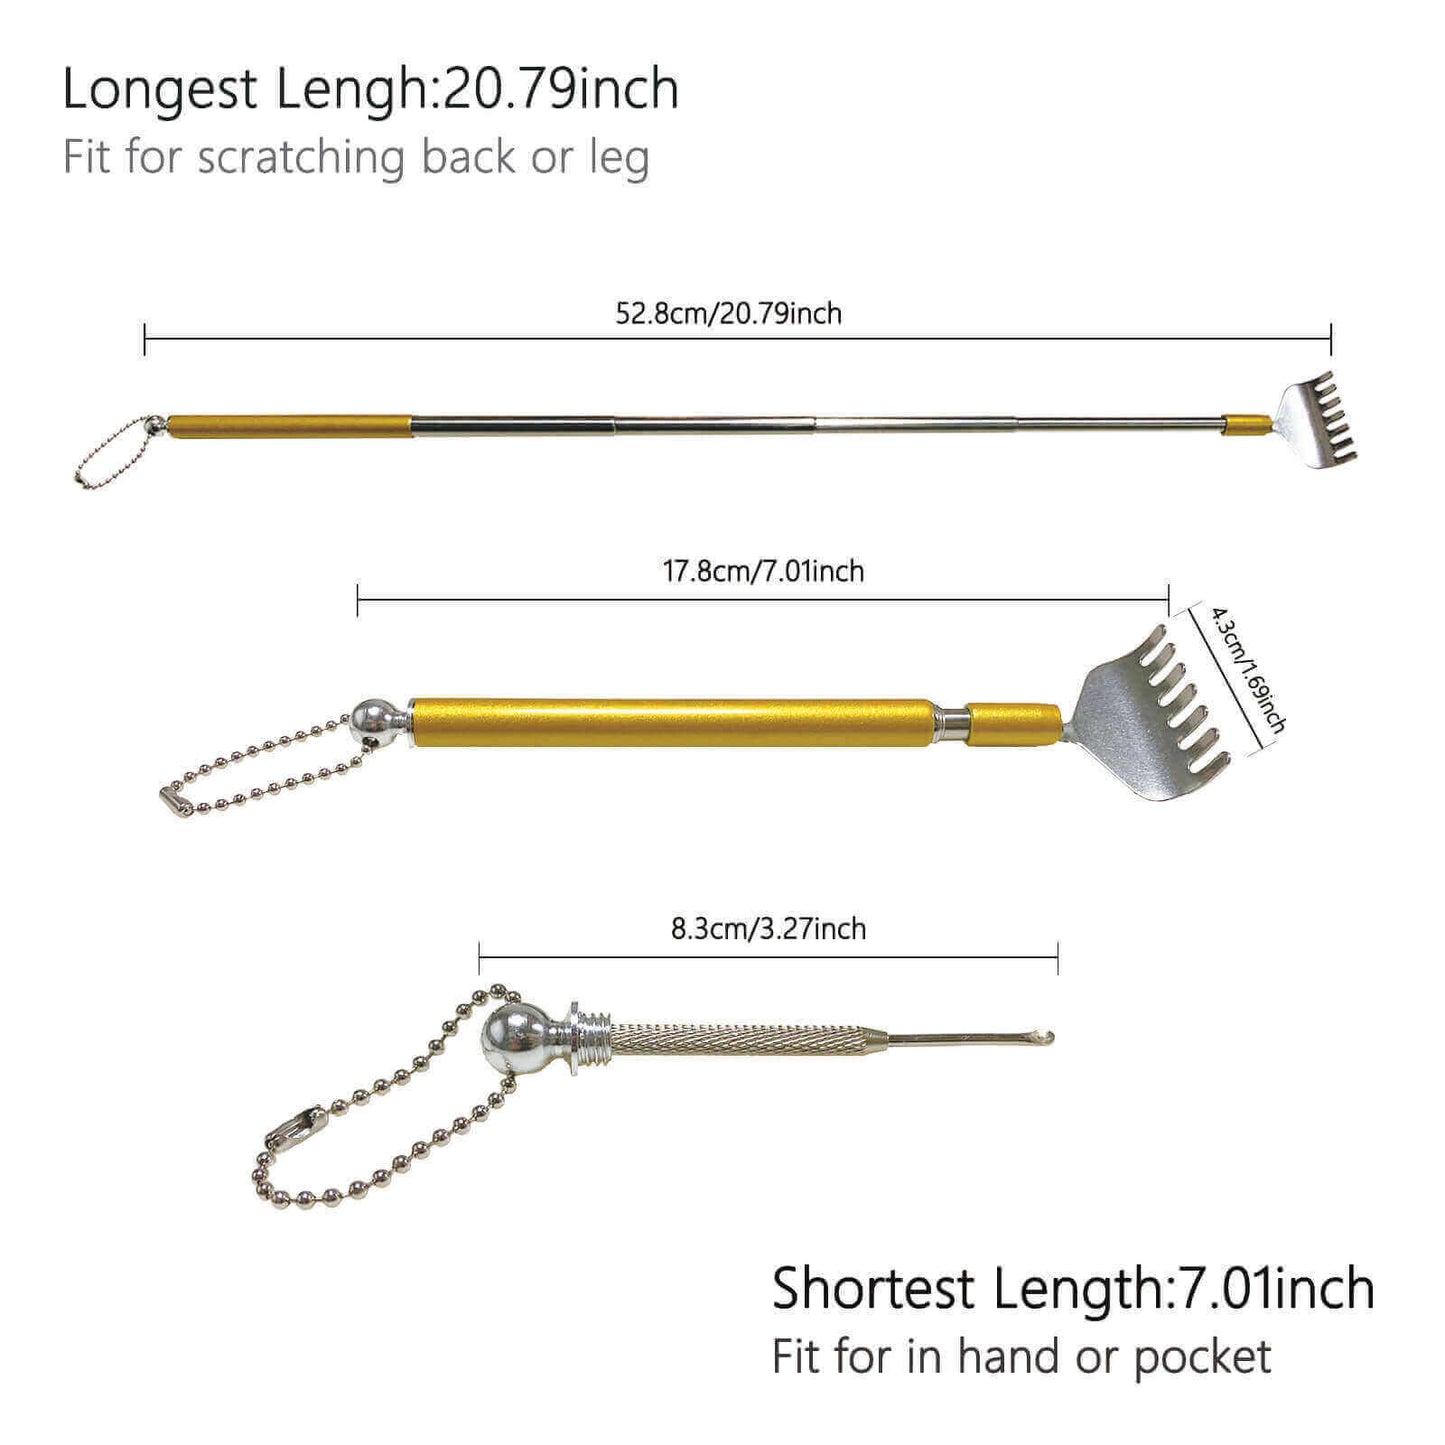 Extendable Back Scratcher with Built-in Ear Wax Remover, 3 adjustable lengths